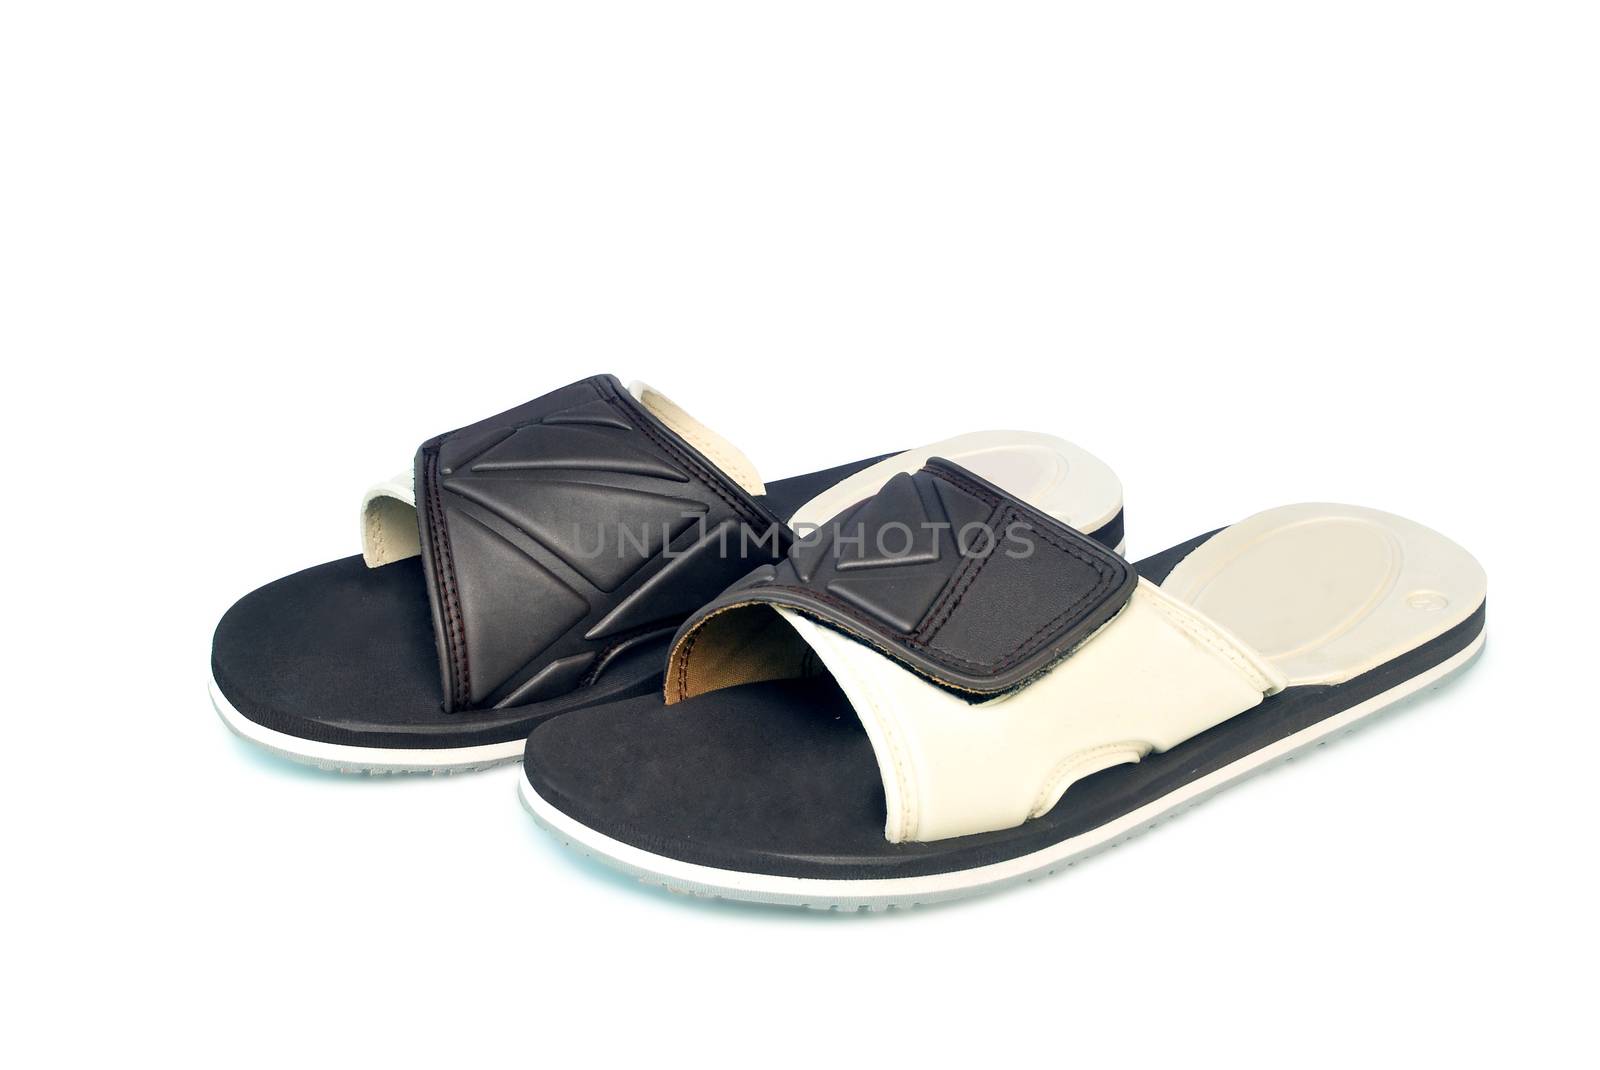 Dark brown sandals on white background.With Clipping Path.